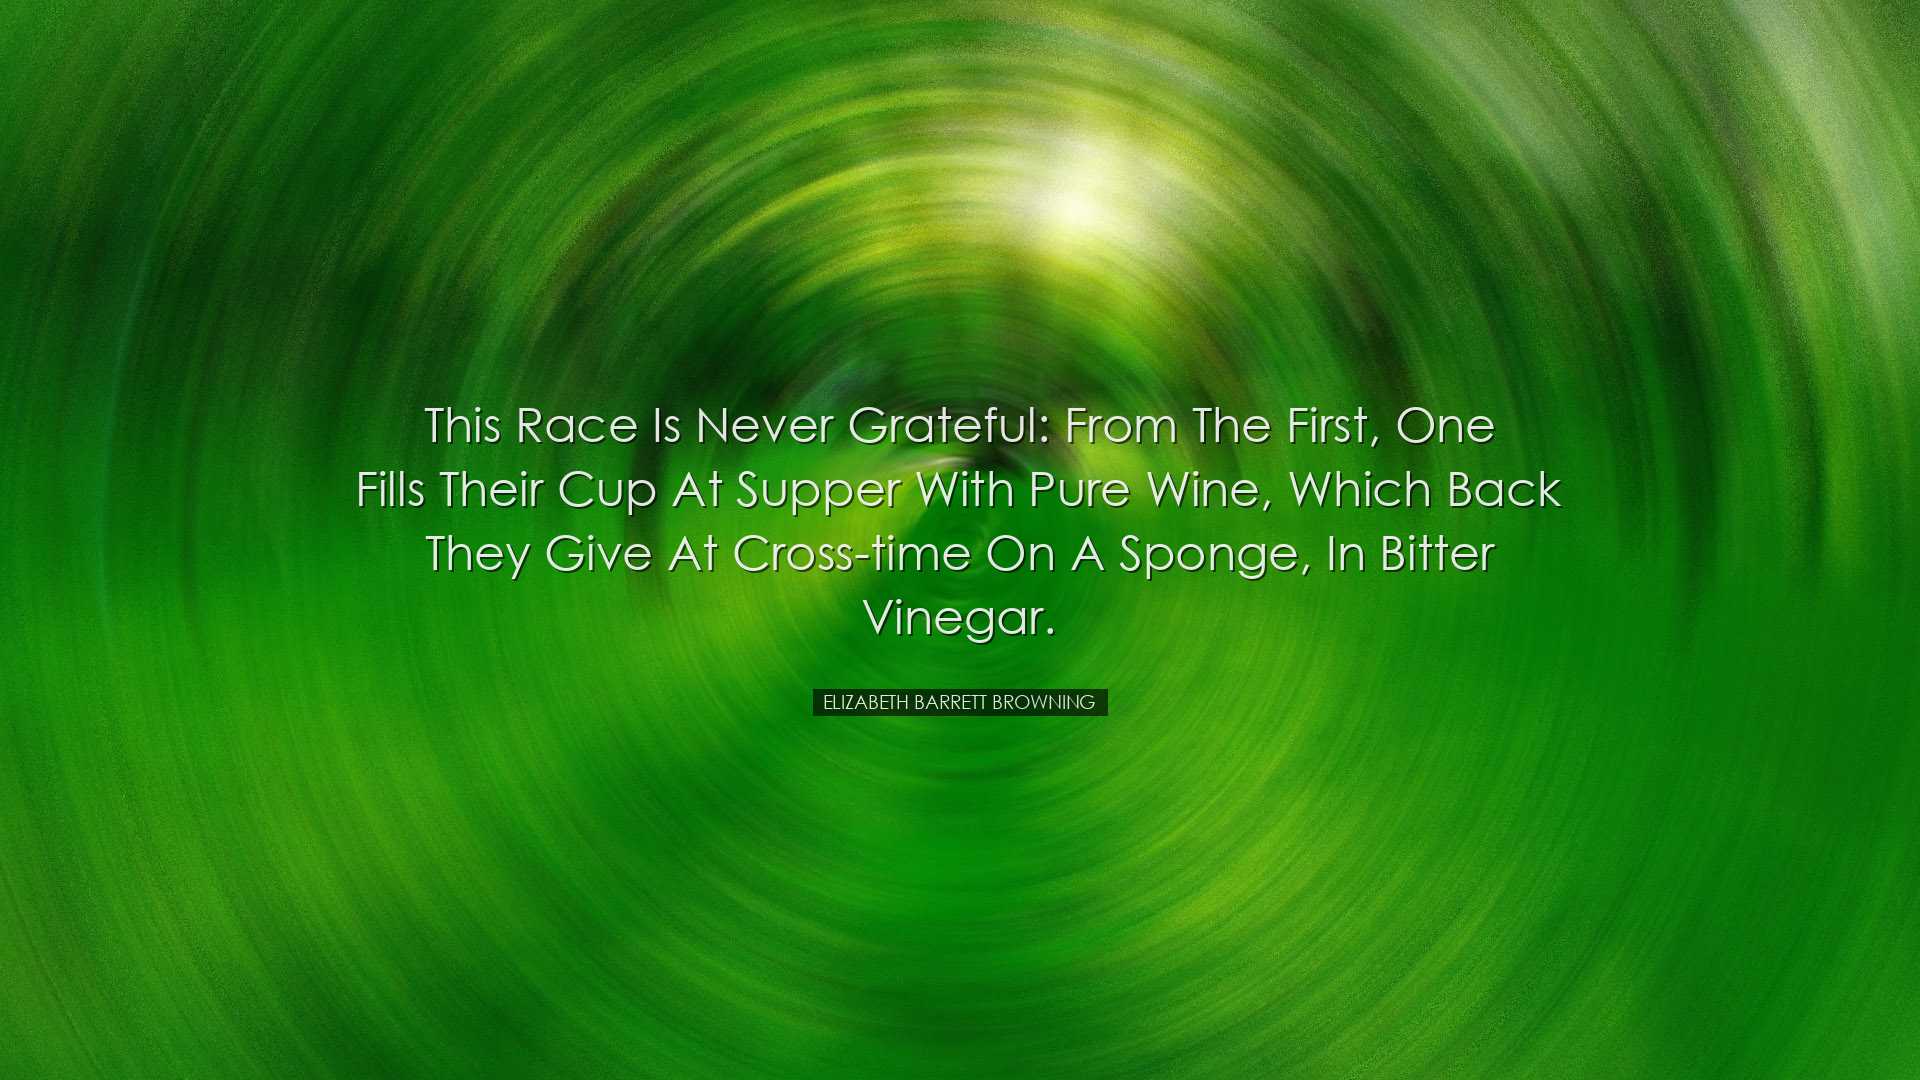 This race is never grateful: from the first, One fills their cup a